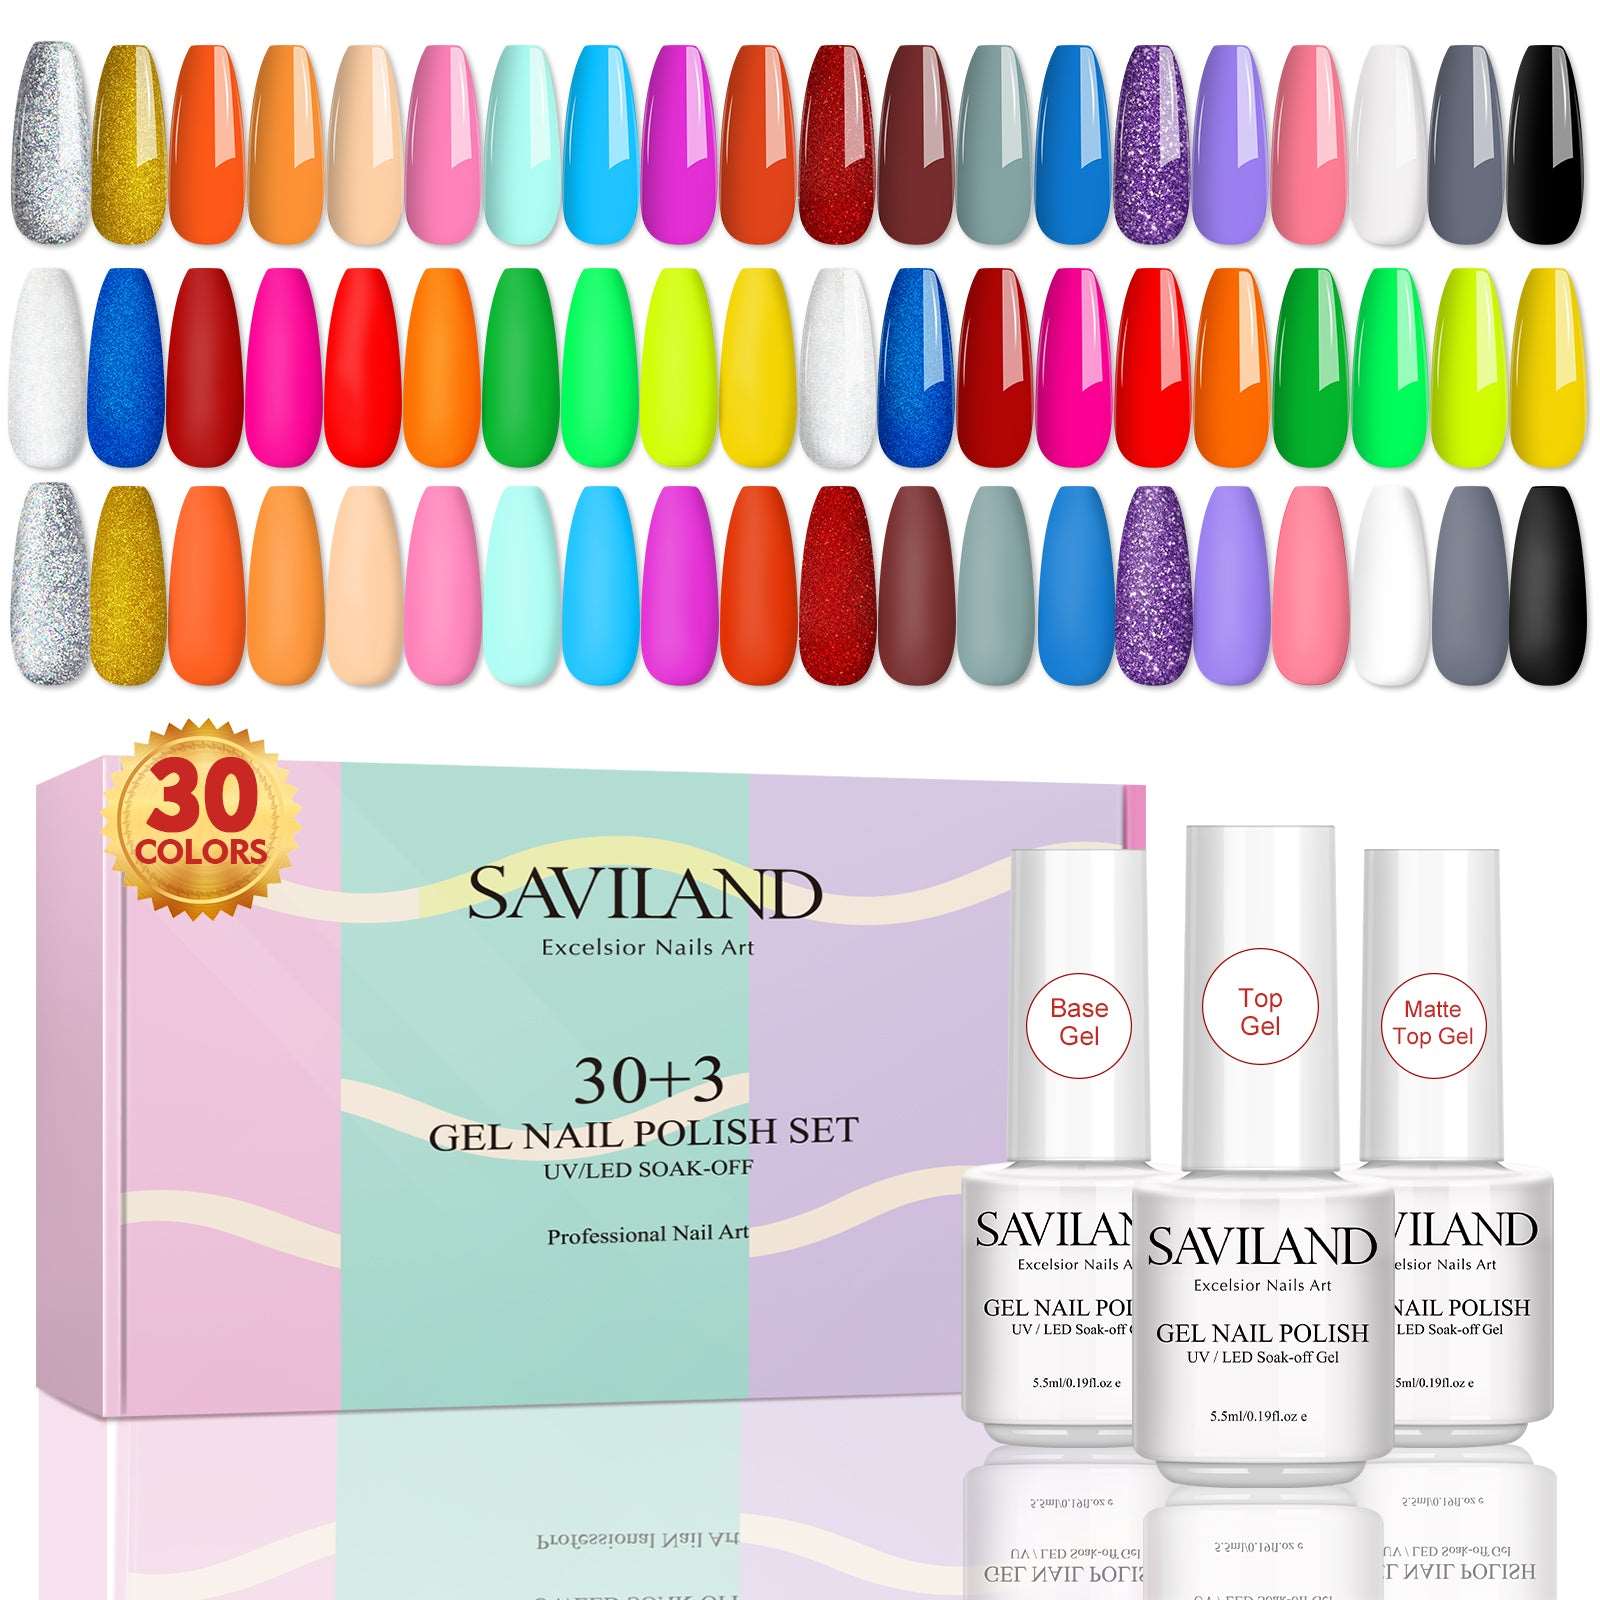 How to Do Gel Nails at Home-Sally Hansen Gel Polish Starter Kit Review